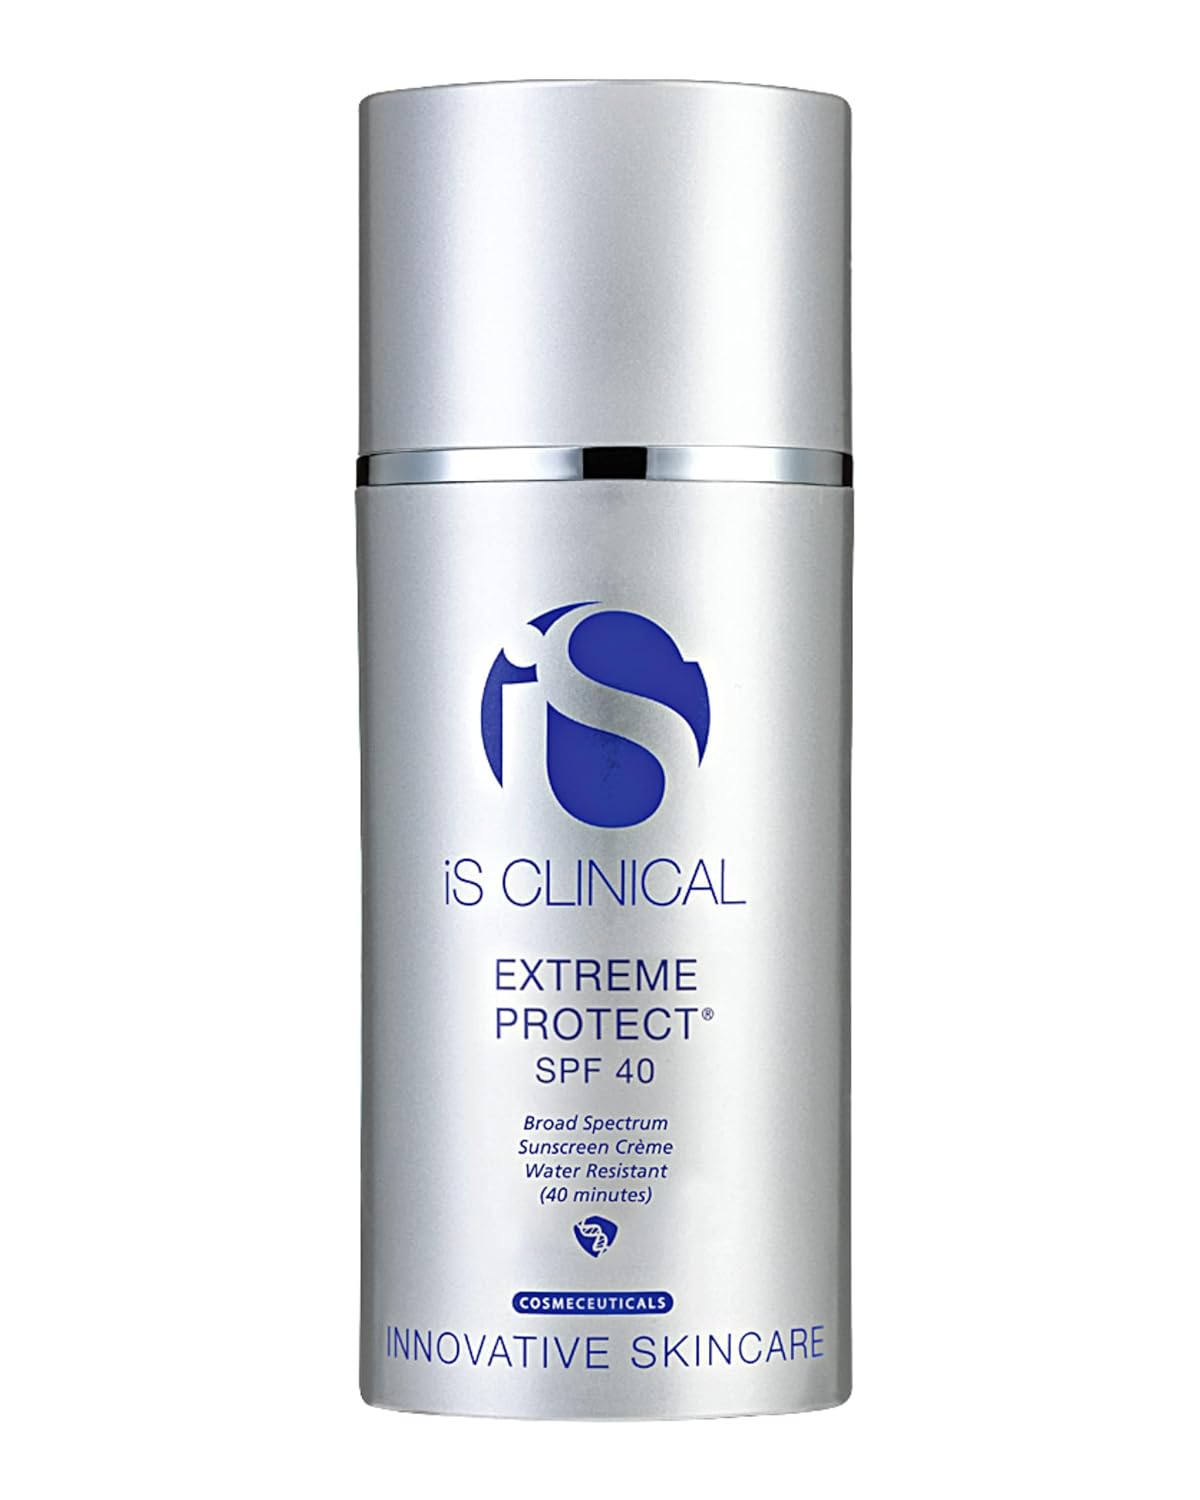 iS Clinical Extreme Protect SPF 40 PerfecTint Bronze